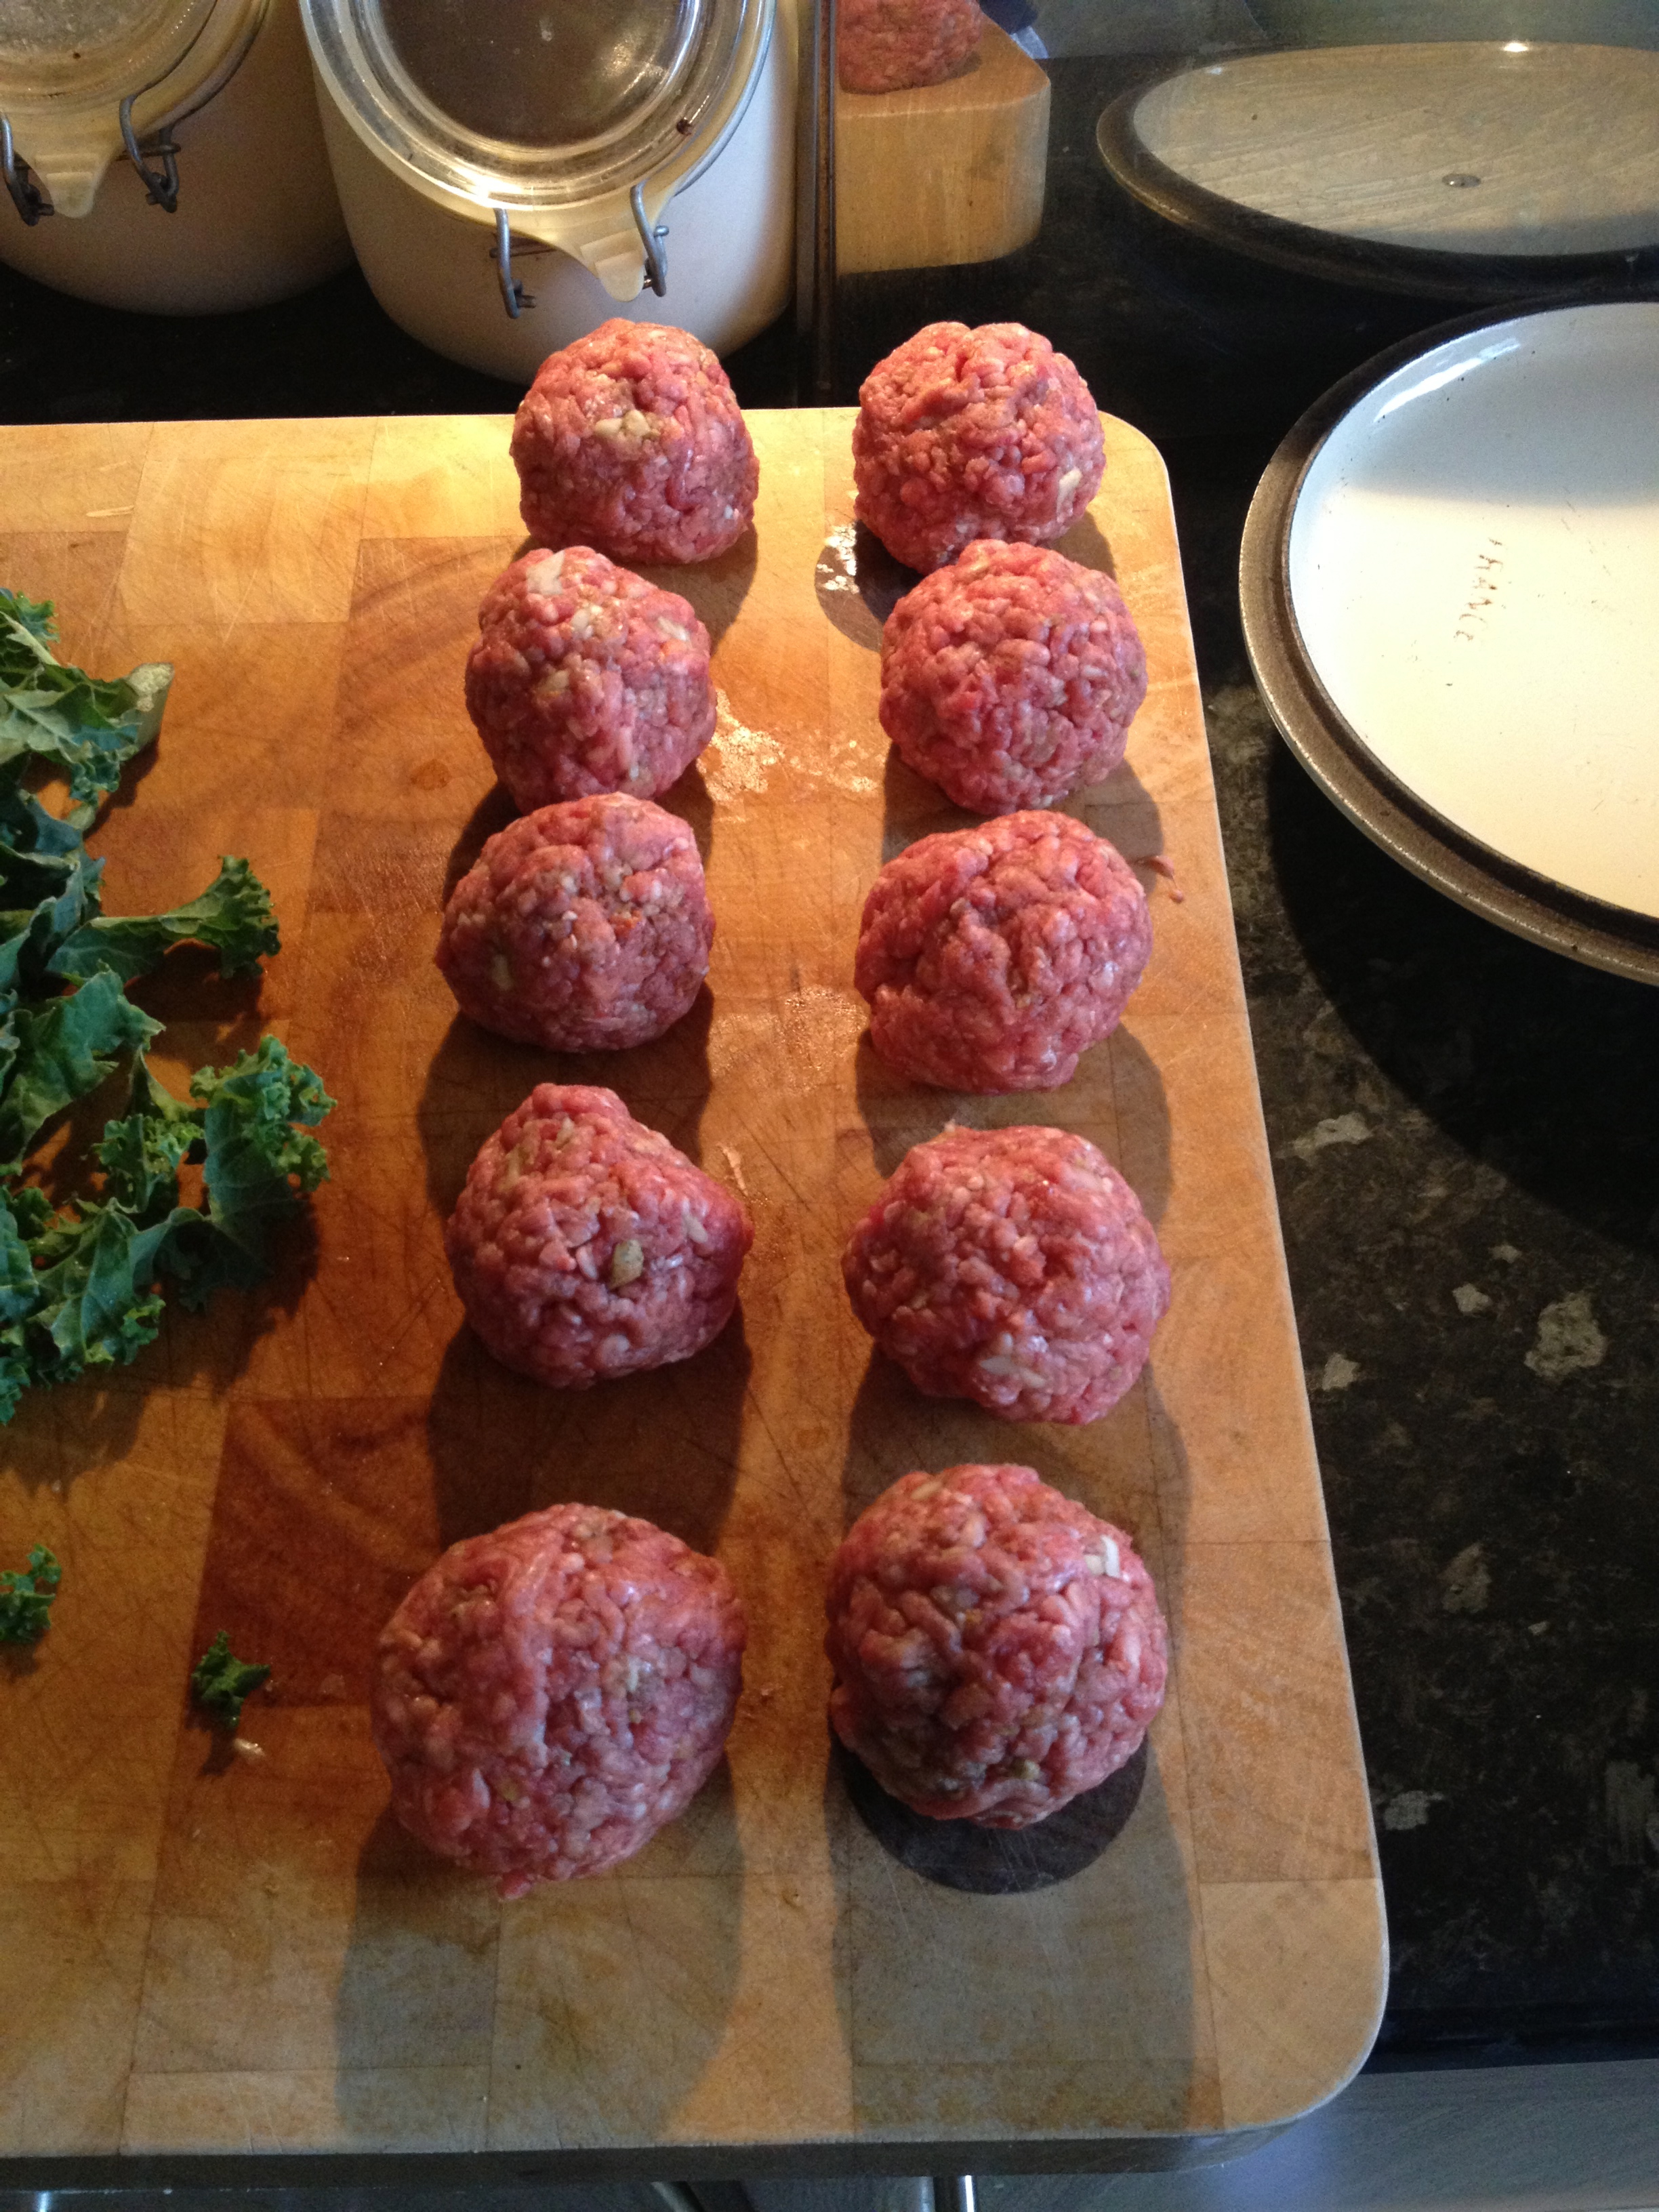 www.hoylesfitness.com, meatballs, paleo, low carb, weight loss, Meatballs in Tomato and Vegetable Sauce